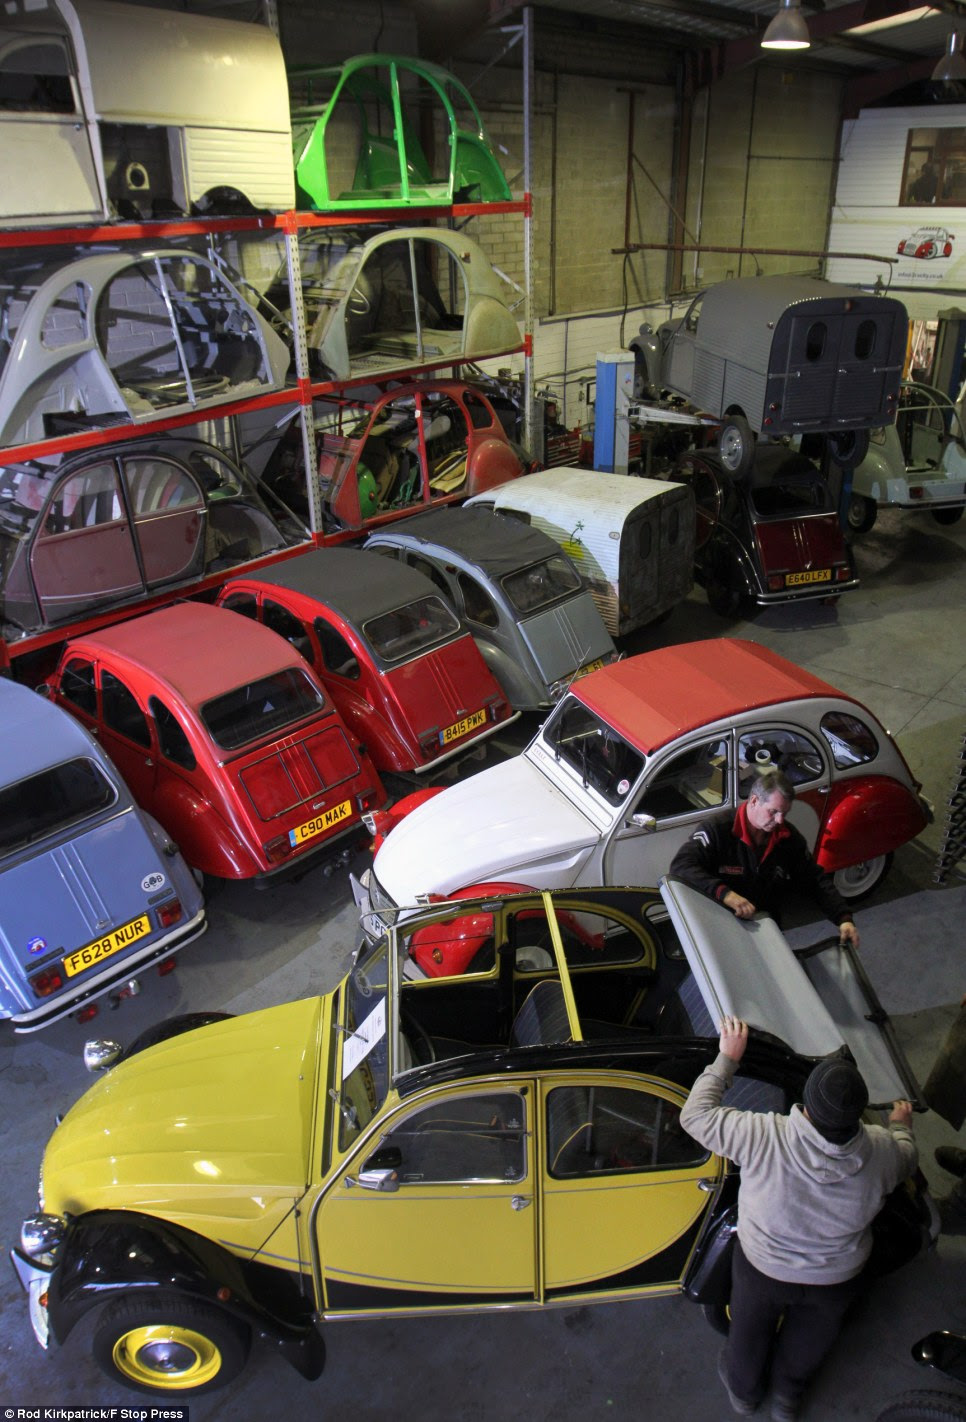 Mr Shields employs six full-time staff and restores a variety of 2CV-based vehicles including vans and vehicles dating back to the 1950s